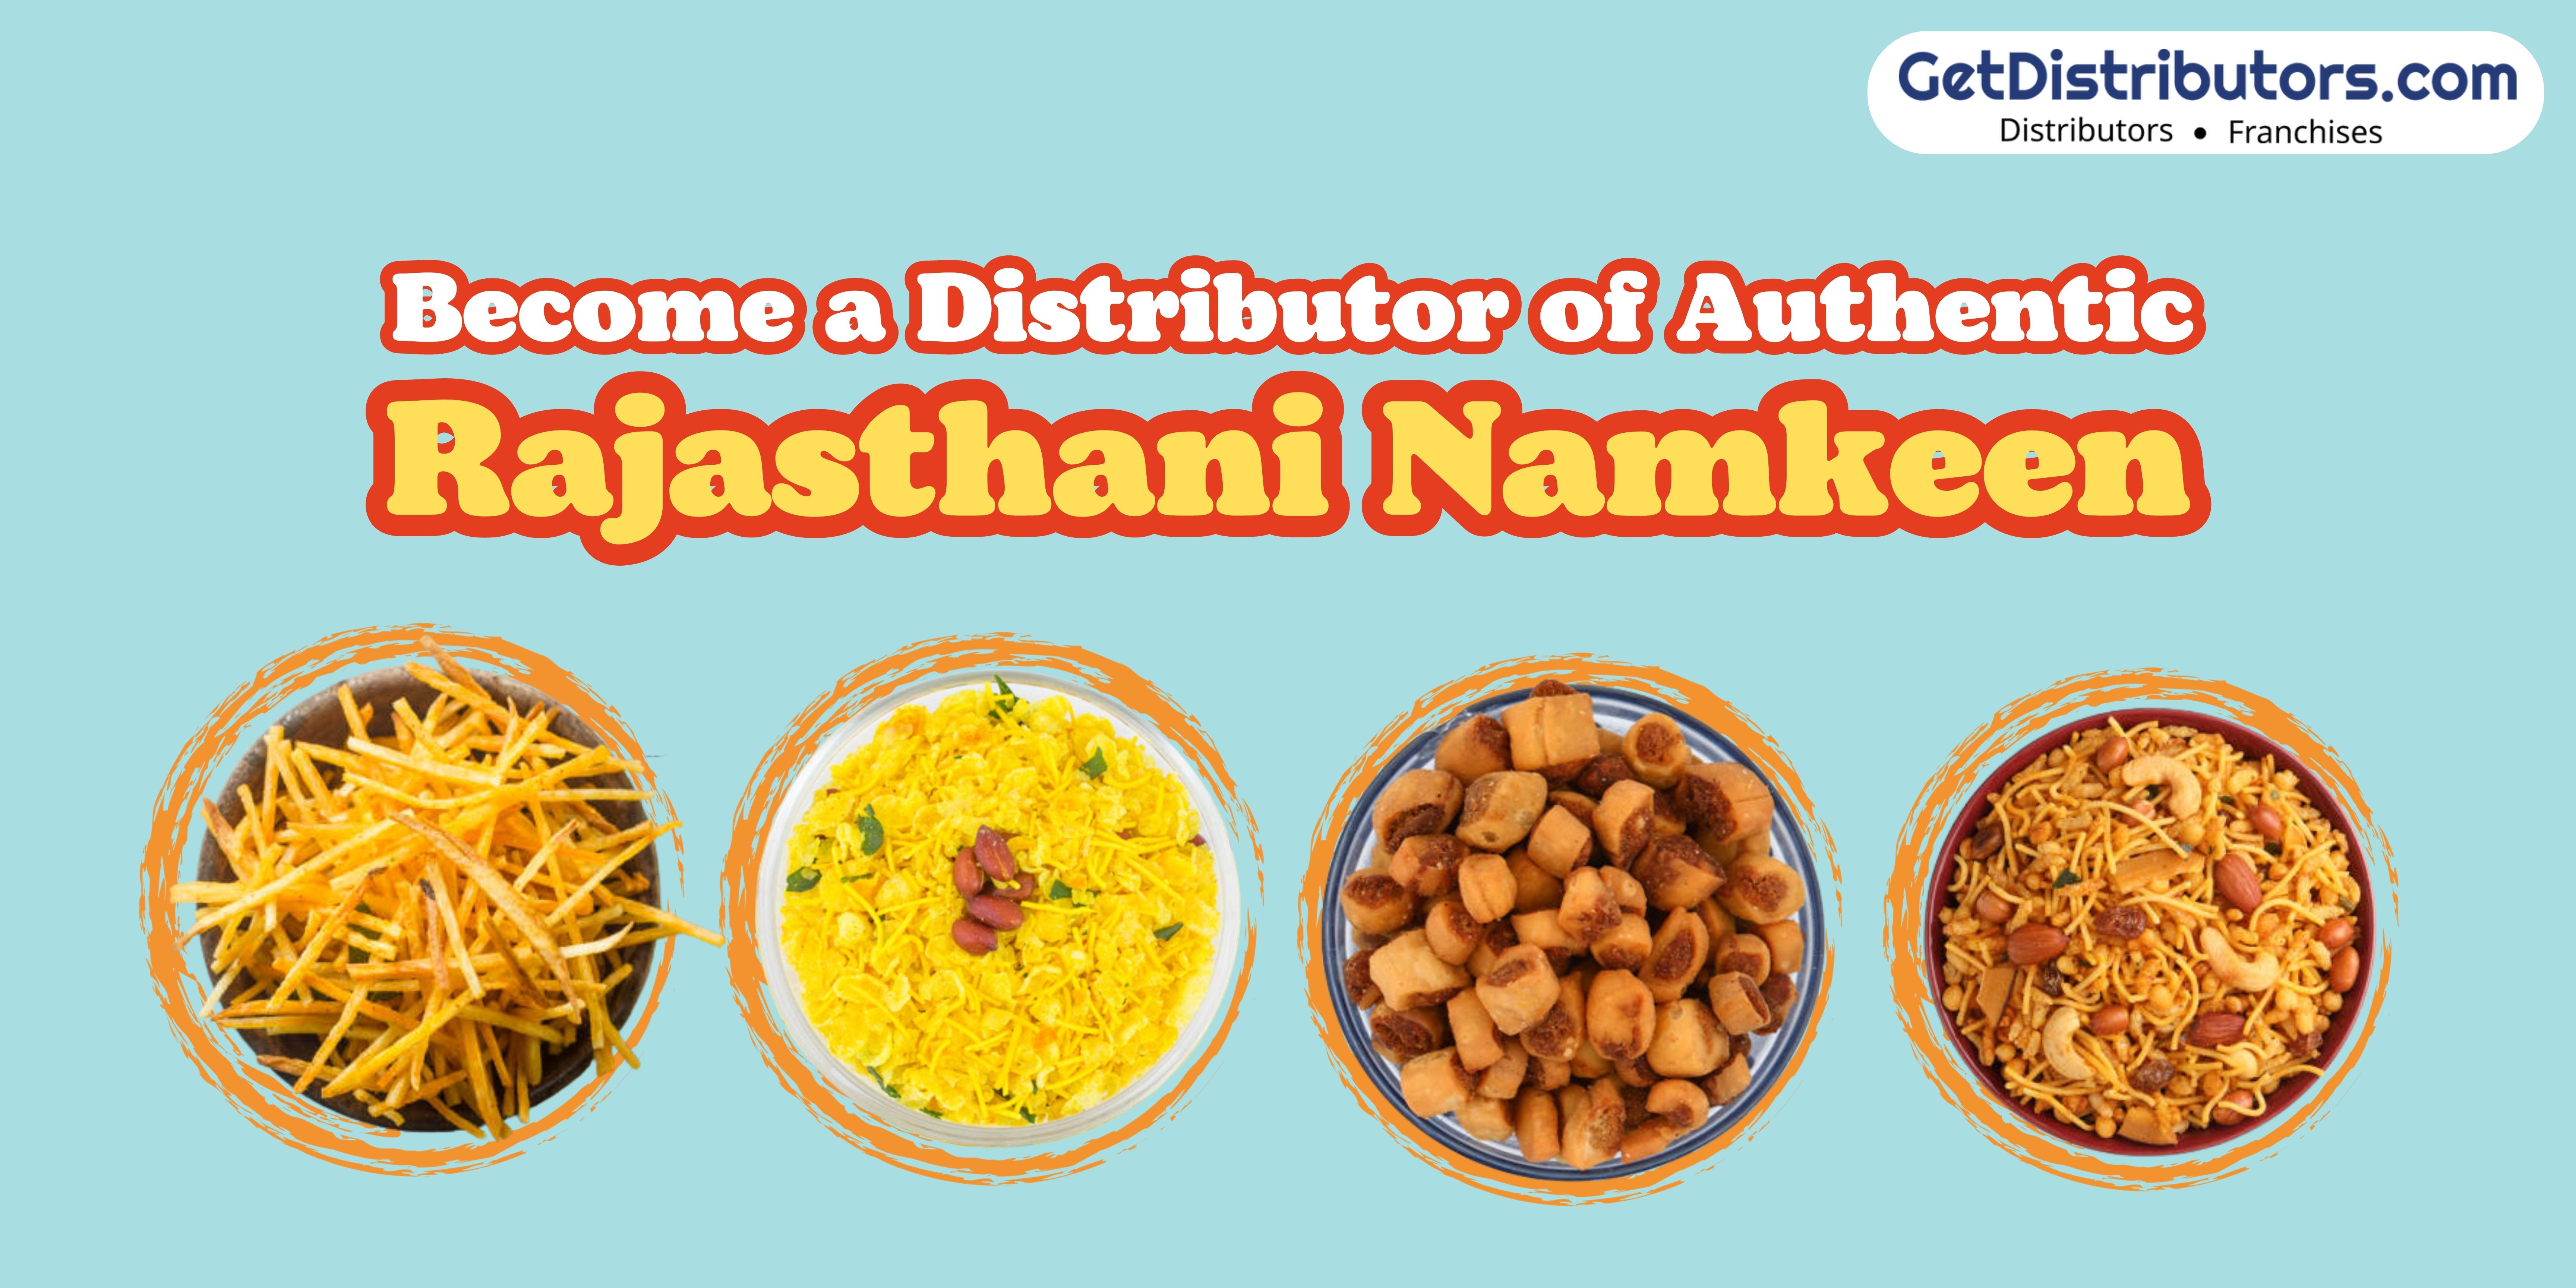 Become a Distributor of Authentic Rajasthani Namkeen